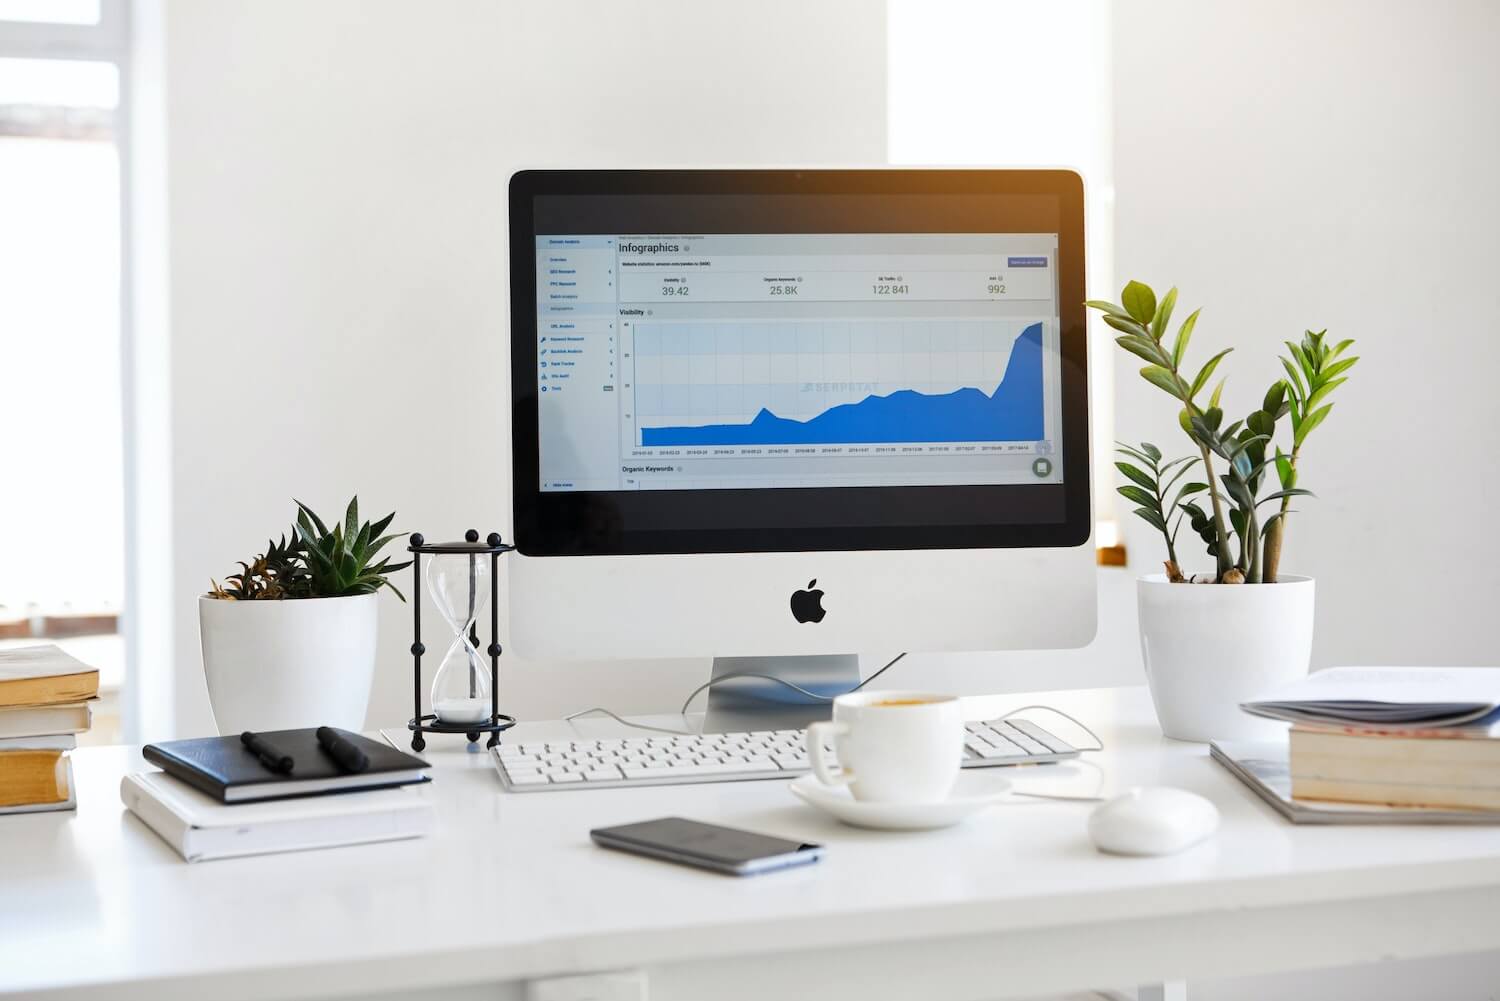 Accounting Software for Mac? Check out Xero